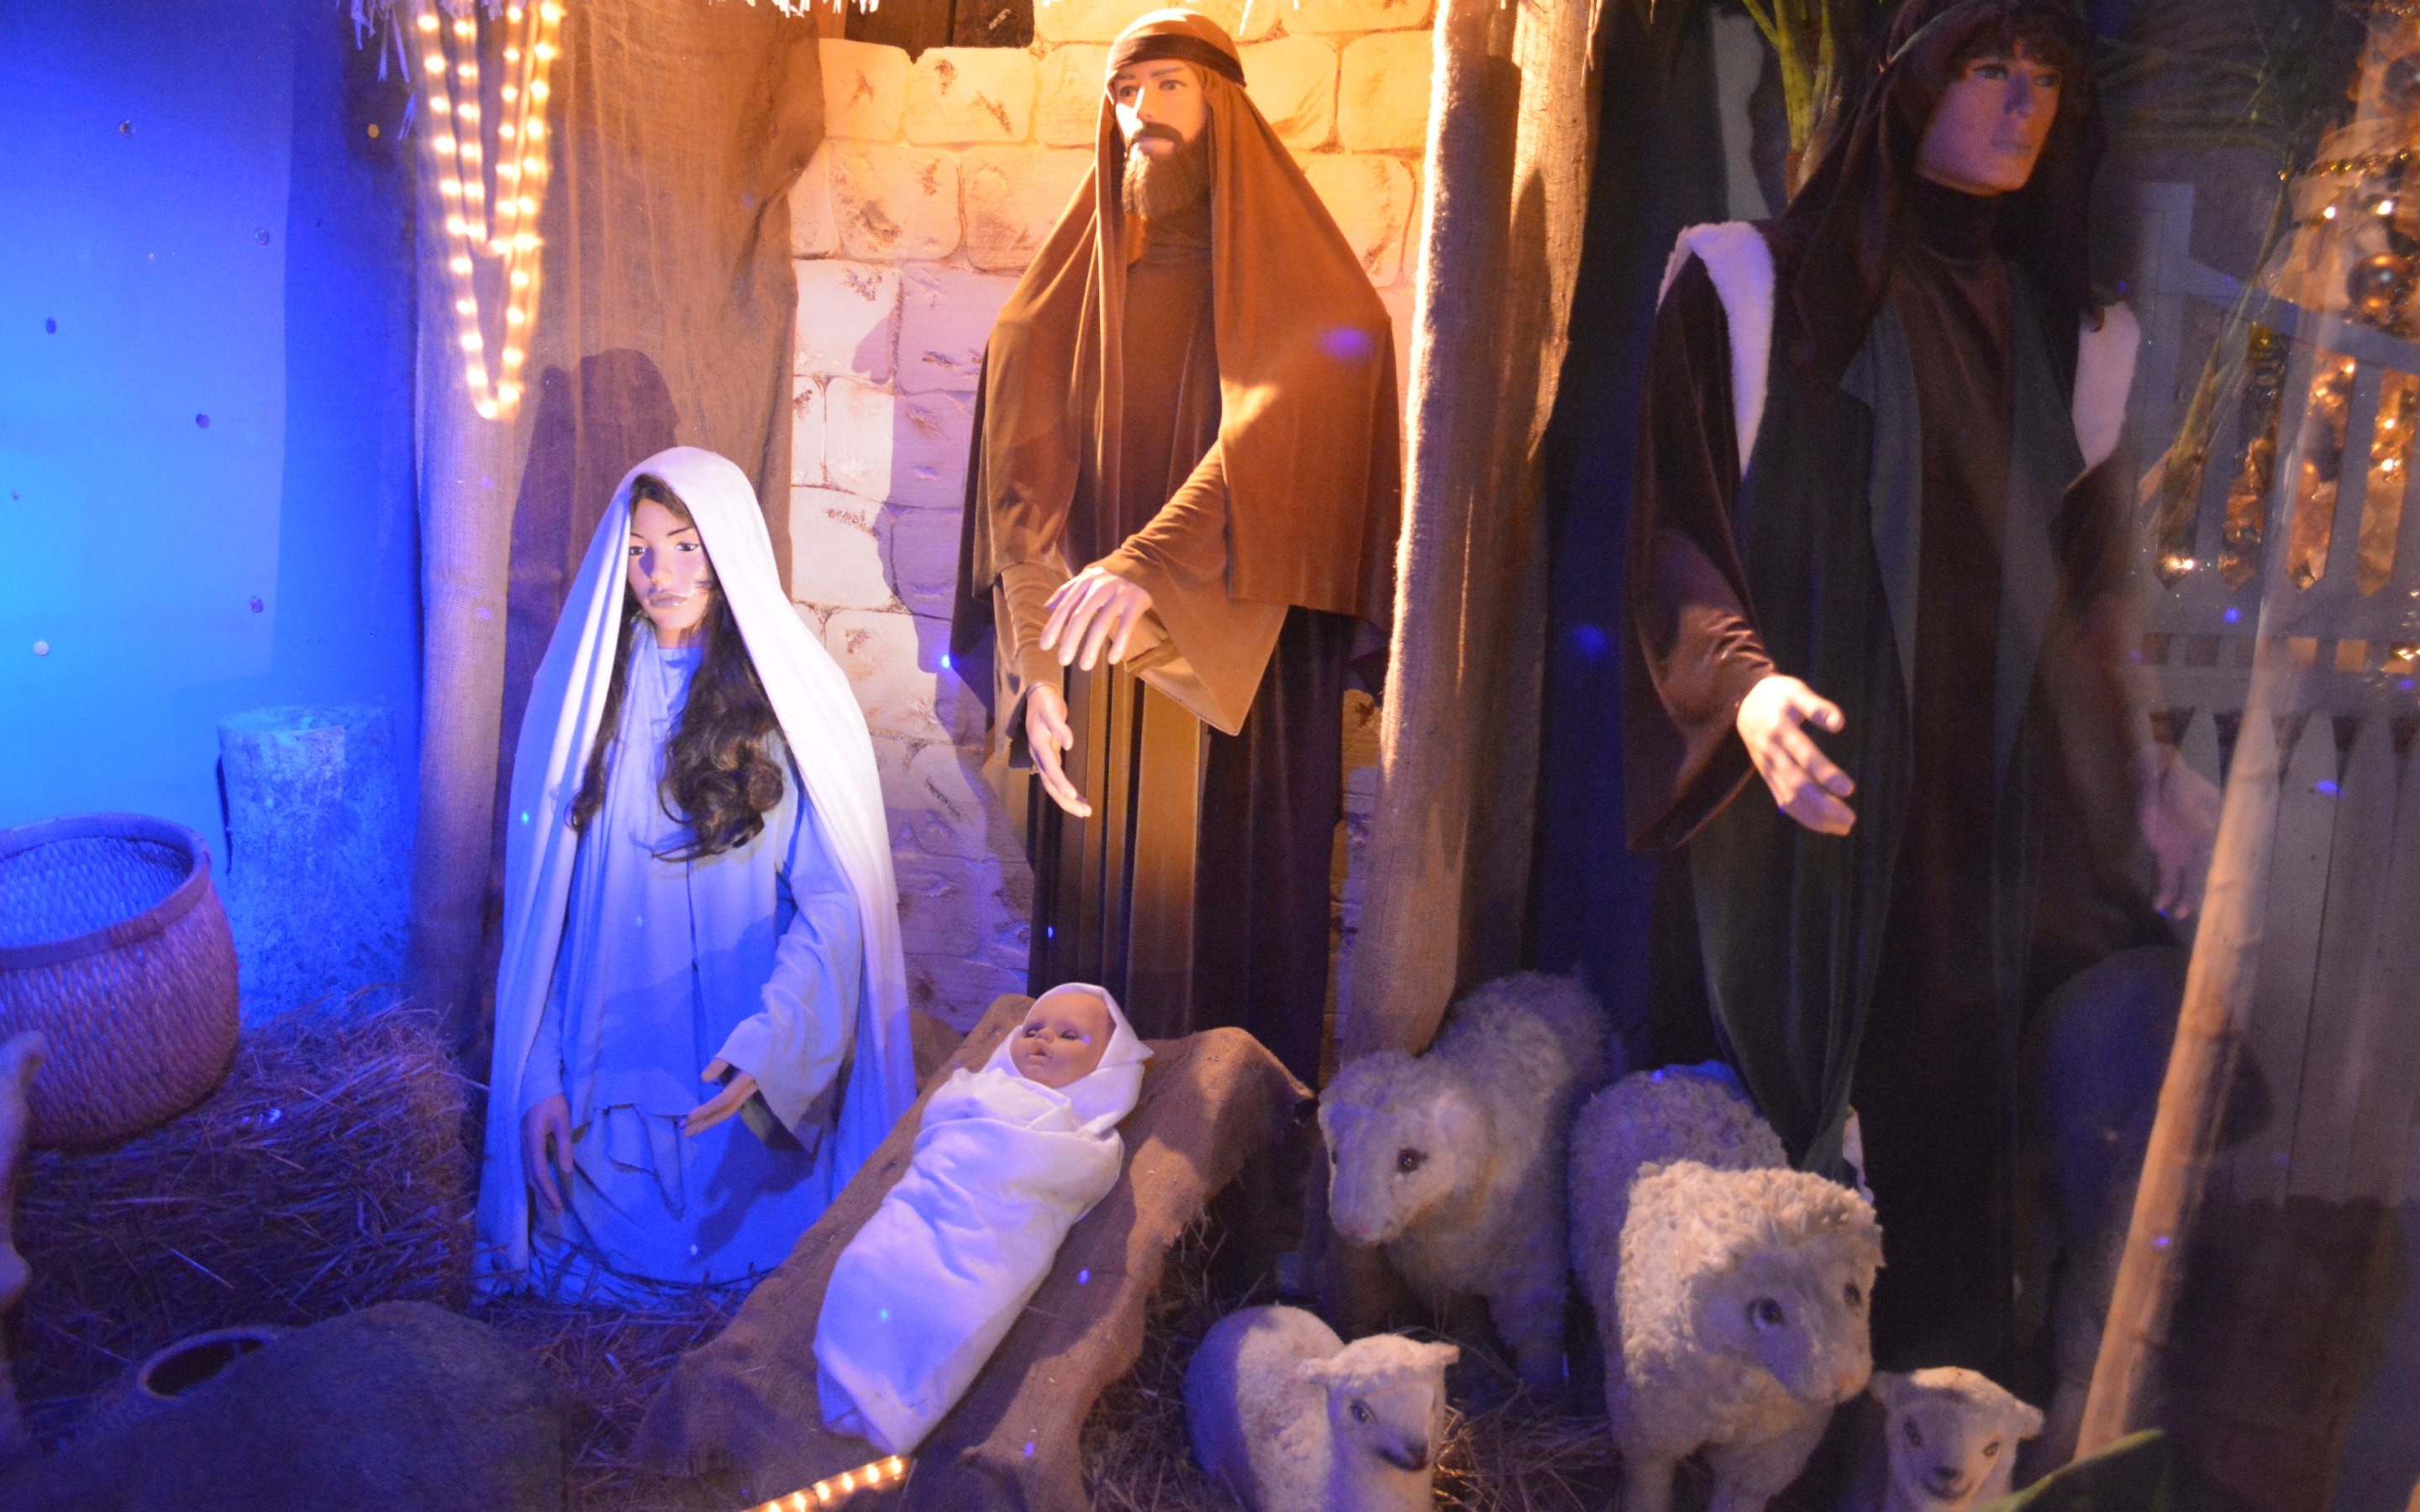 2880x1800 3 pictures that celebrates the Nativity scene at the Christmas holiday Â·  Save the wallpapers from listed links at 4K, HD and wide sizes if you'd  like to ...